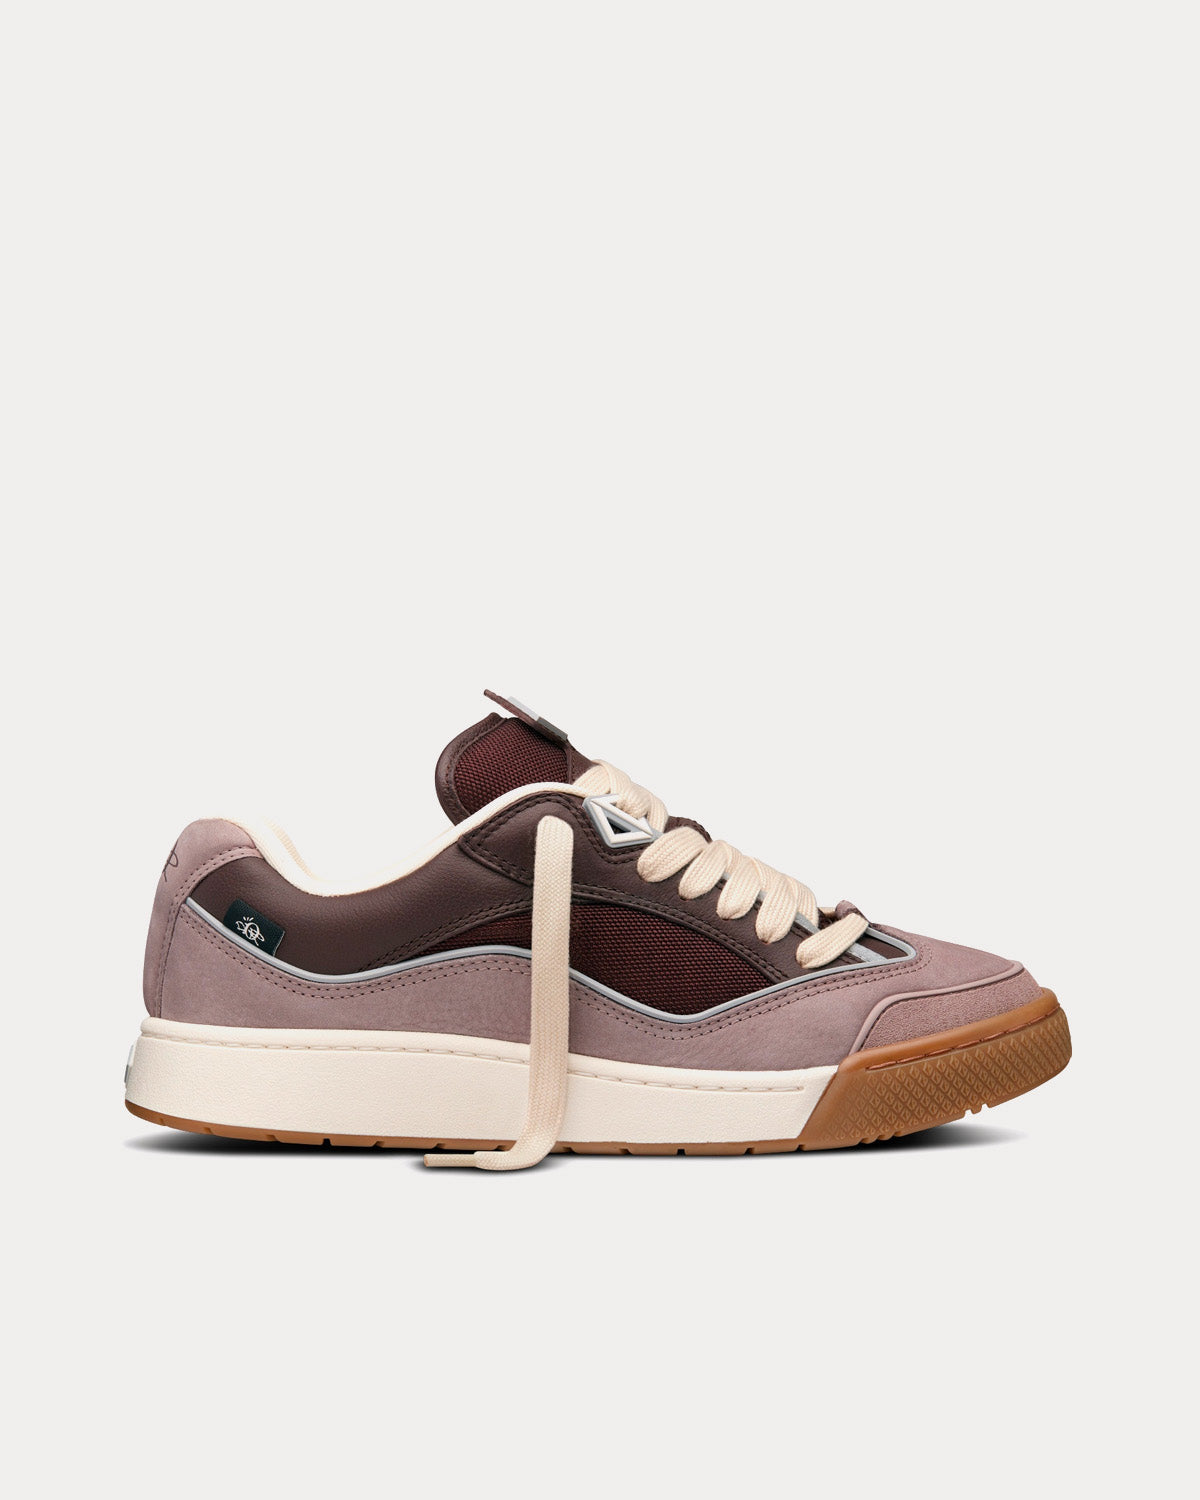 B713 'Cactus Jack' Mocha Grained Calfskin and Technical Mesh with Mauve  Nubuck Calfskin Low Top Sneakers